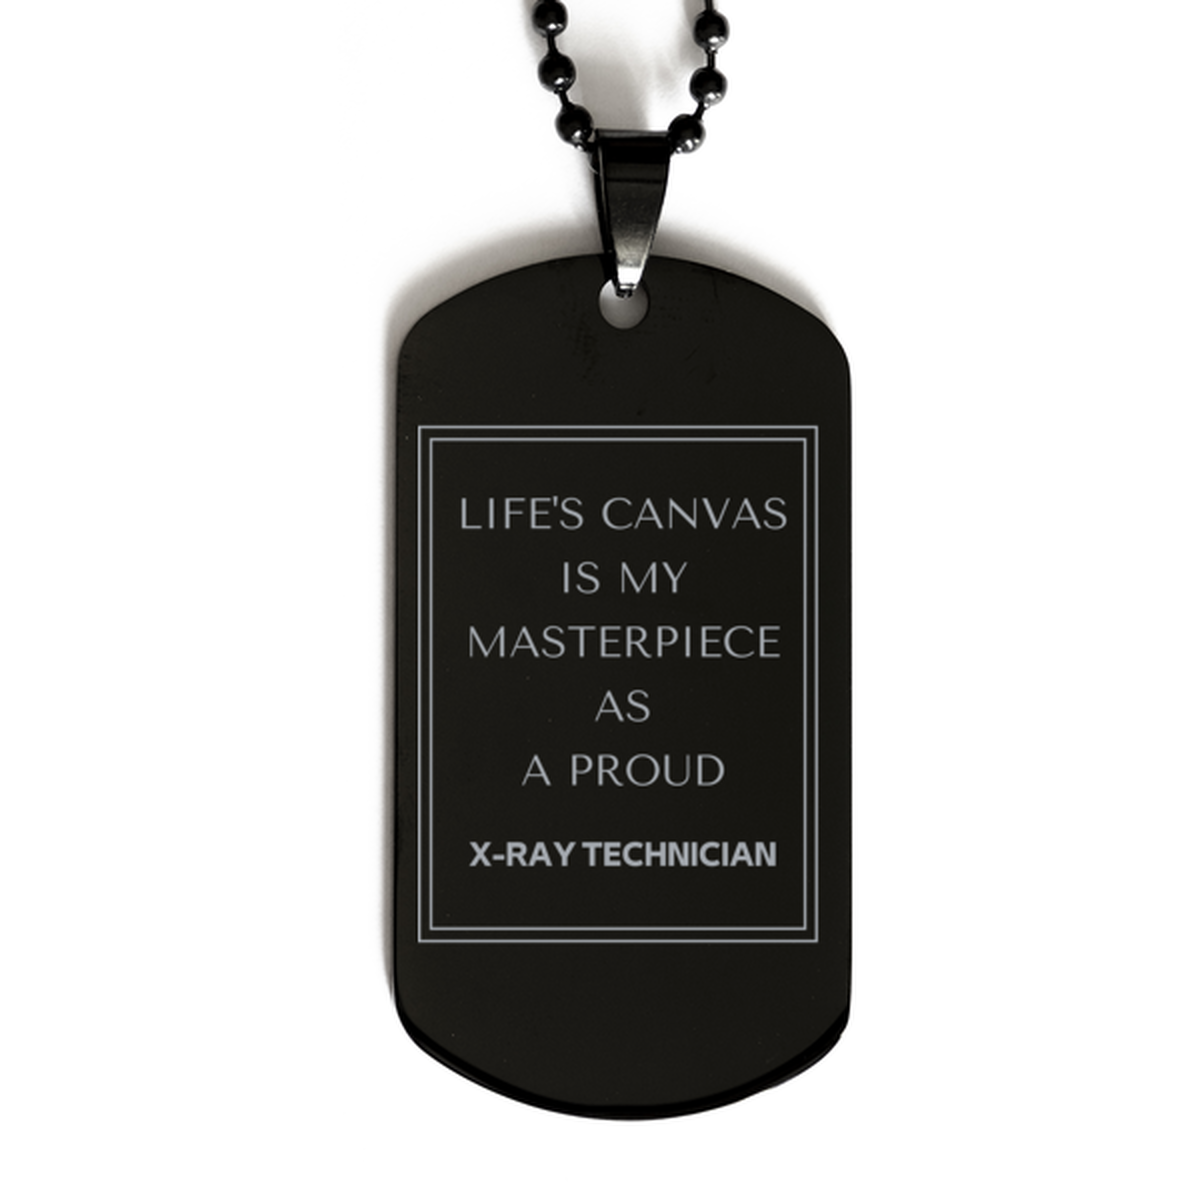 Proud X-Ray Technician Gifts, Life's canvas is my masterpiece, Epic Birthday Christmas Unique Black Dog Tag For X-Ray Technician, Coworkers, Men, Women, Friends